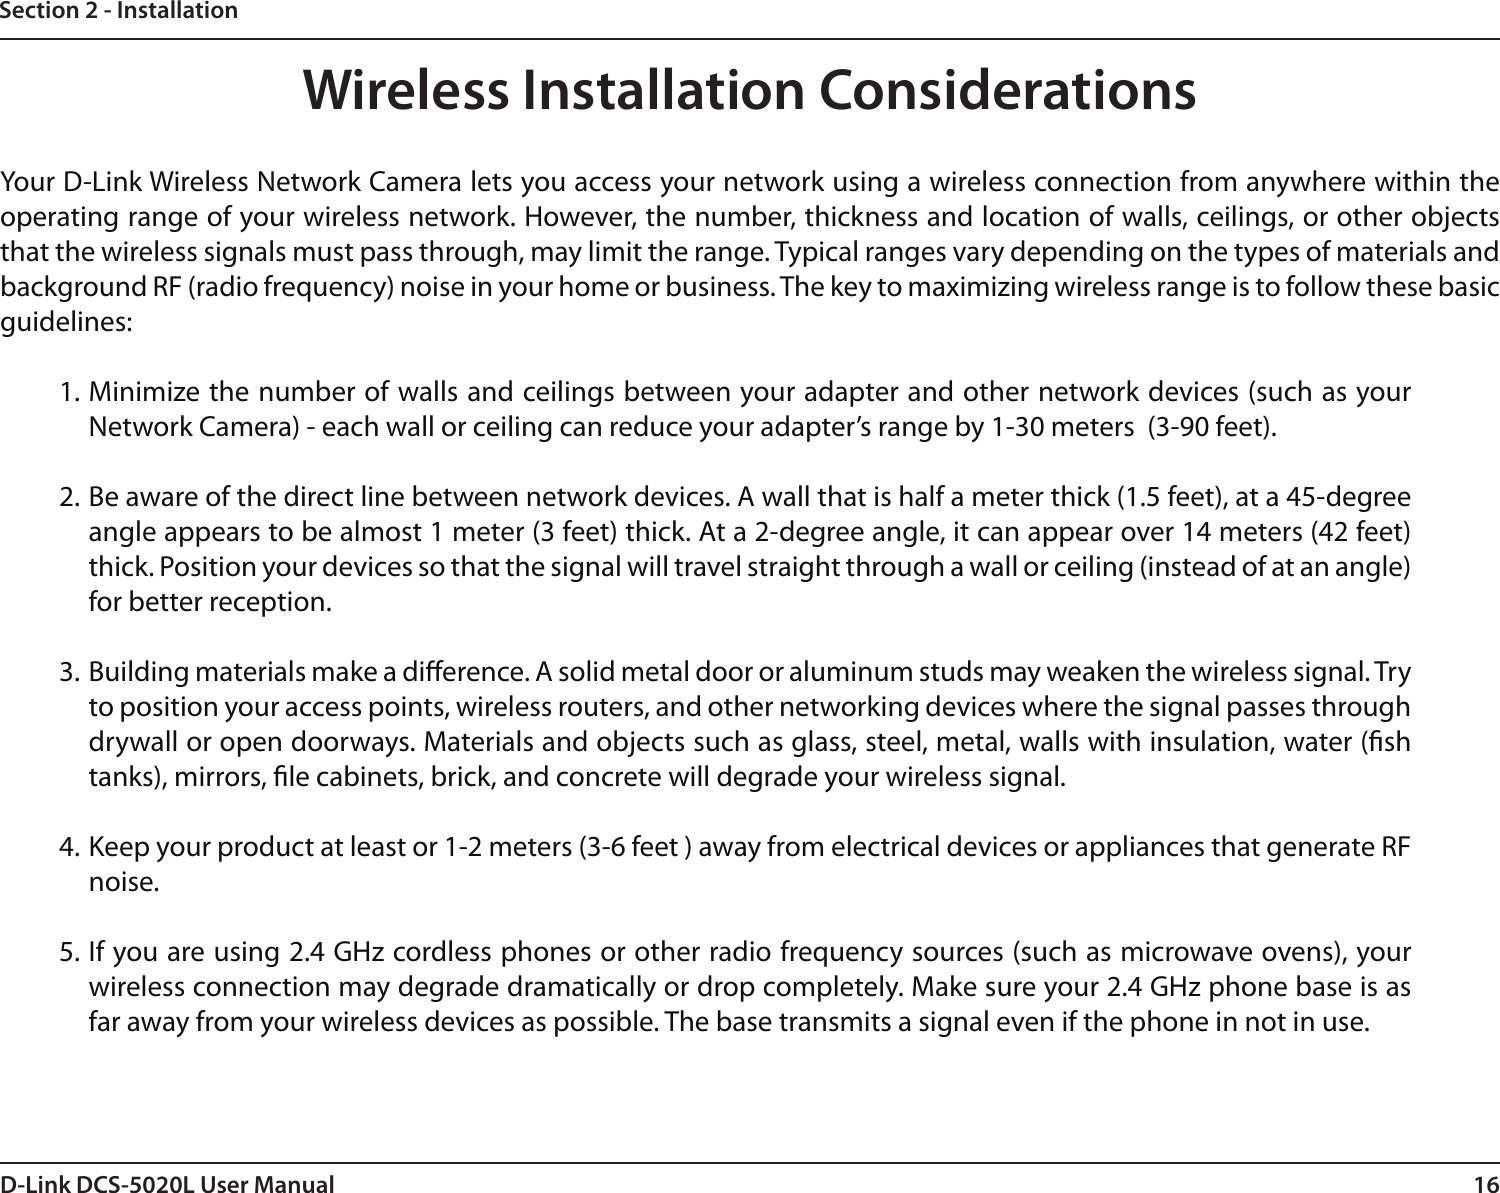 16D-Link DCS-5020L User ManualSection 2 - InstallationWireless Installation ConsiderationsYour D-Link Wireless Network Camera lets you access your network using a wireless connection from anywhere within the operating range of your wireless network. However, the number, thickness and location of walls, ceilings, or other objects that the wireless signals must pass through, may limit the range. Typical ranges vary depending on the types of materials and background RF (radio frequency) noise in your home or business. The key to maximizing wireless range is to follow these basic guidelines:1. Minimize the number of walls and ceilings between your adapter and other network devices (such as your Network Camera) - each wall or ceiling can reduce your adapter’s range by 1-30 meters  (3-90 feet).2. Be aware of the direct line between network devices. A wall that is half a meter thick (1.5 feet), at a 45-degree angle appears to be almost 1 meter (3 feet) thick. At a 2-degree angle, it can appear over 14 meters (42 feet) thick. Position your devices so that the signal will travel straight through a wall or ceiling (instead of at an angle) for better reception.3. Building materials make a dierence. A solid metal door or aluminum studs may weaken the wireless signal. Try to position your access points, wireless routers, and other networking devices where the signal passes through drywall or open doorways. Materials and objects such as glass, steel, metal, walls with insulation, water (sh tanks), mirrors, le cabinets, brick, and concrete will degrade your wireless signal.4. Keep your product at least or 1-2 meters (3-6 feet ) away from electrical devices or appliances that generate RF noise.5. If you are using 2.4 GHz cordless phones or other radio frequency sources (such as microwave ovens), your wireless connection may degrade dramatically or drop completely. Make sure your 2.4 GHz phone base is as far away from your wireless devices as possible. The base transmits a signal even if the phone in not in use.